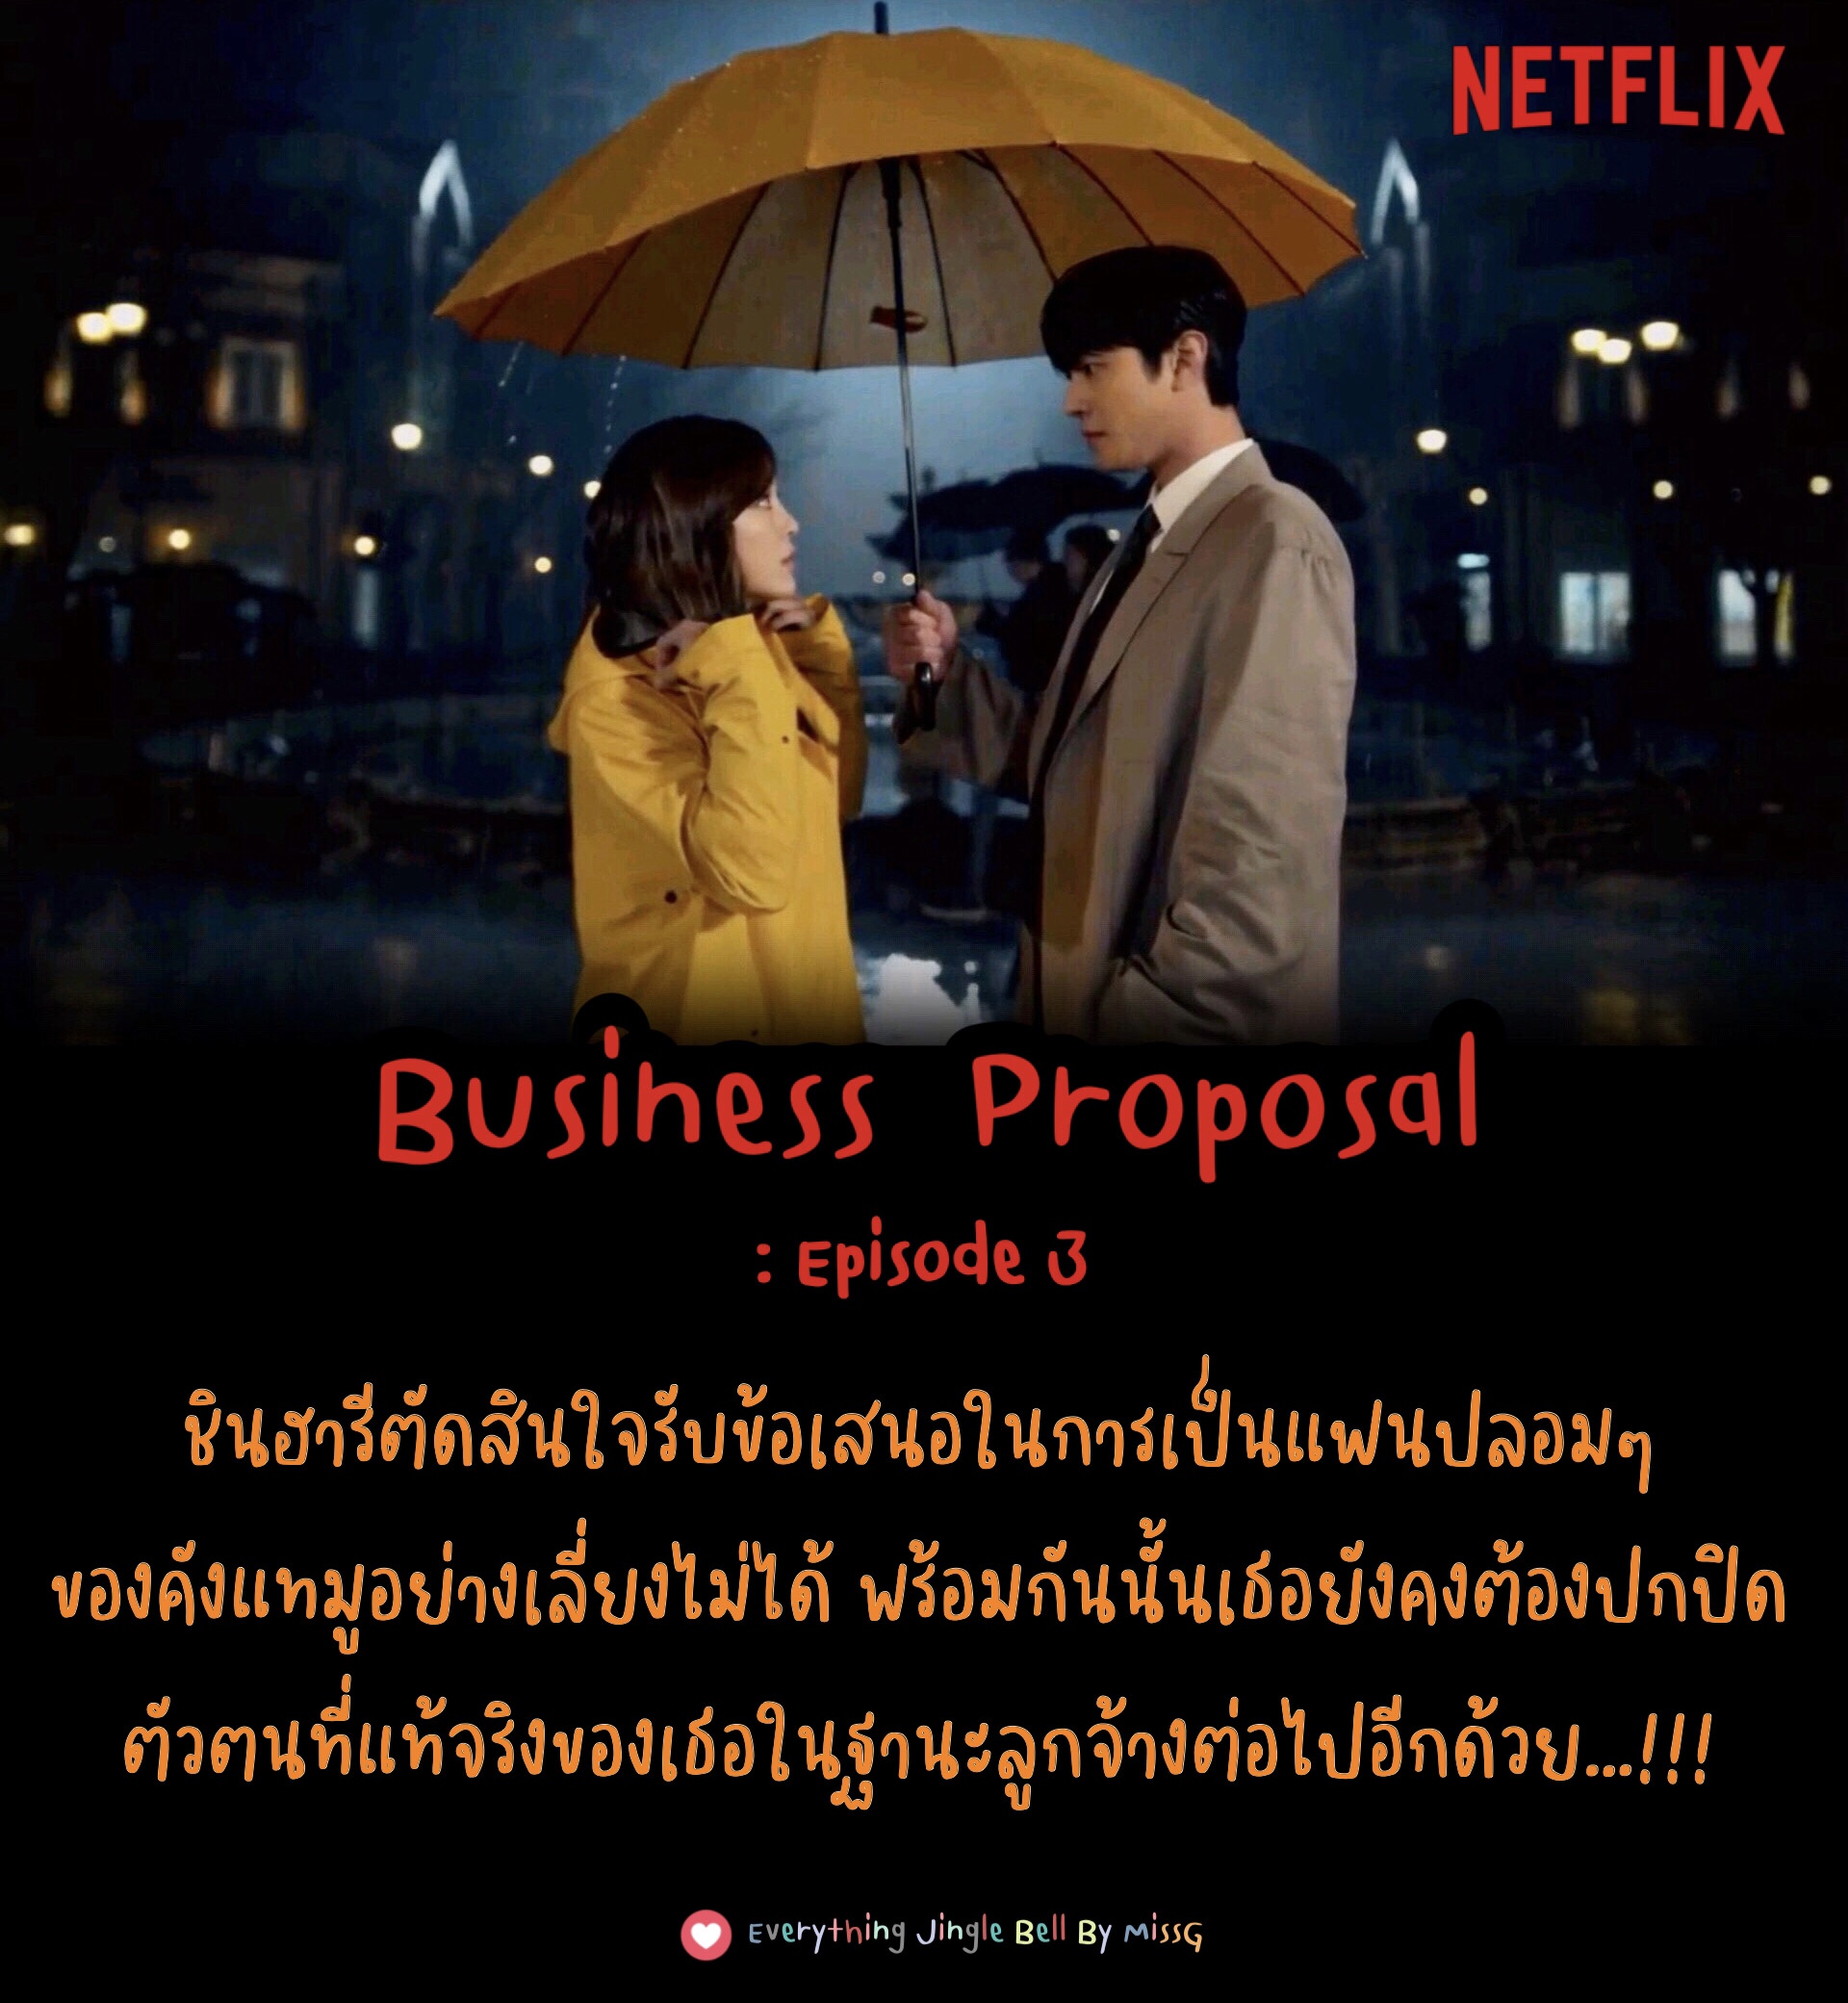 a business proposal ep 3 eng sub